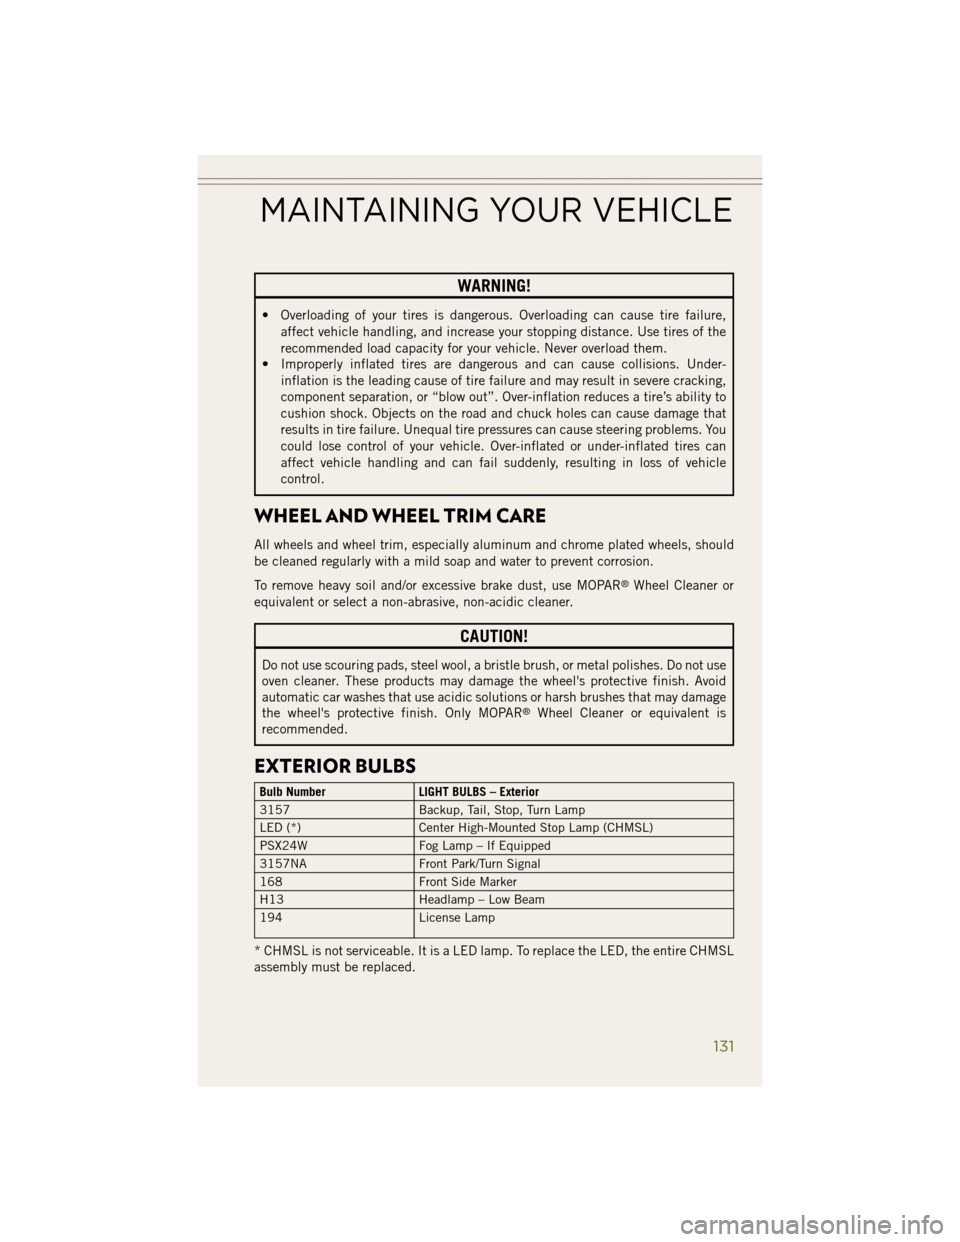 JEEP WRANGLER 2014 JK / 3.G User Guide WARNING!
• Overloading of your tires is dangerous. Overloading can cause tire failure,affect vehicle handling, and increase your stopping distance. Use tires of the
recommended load capacity for you